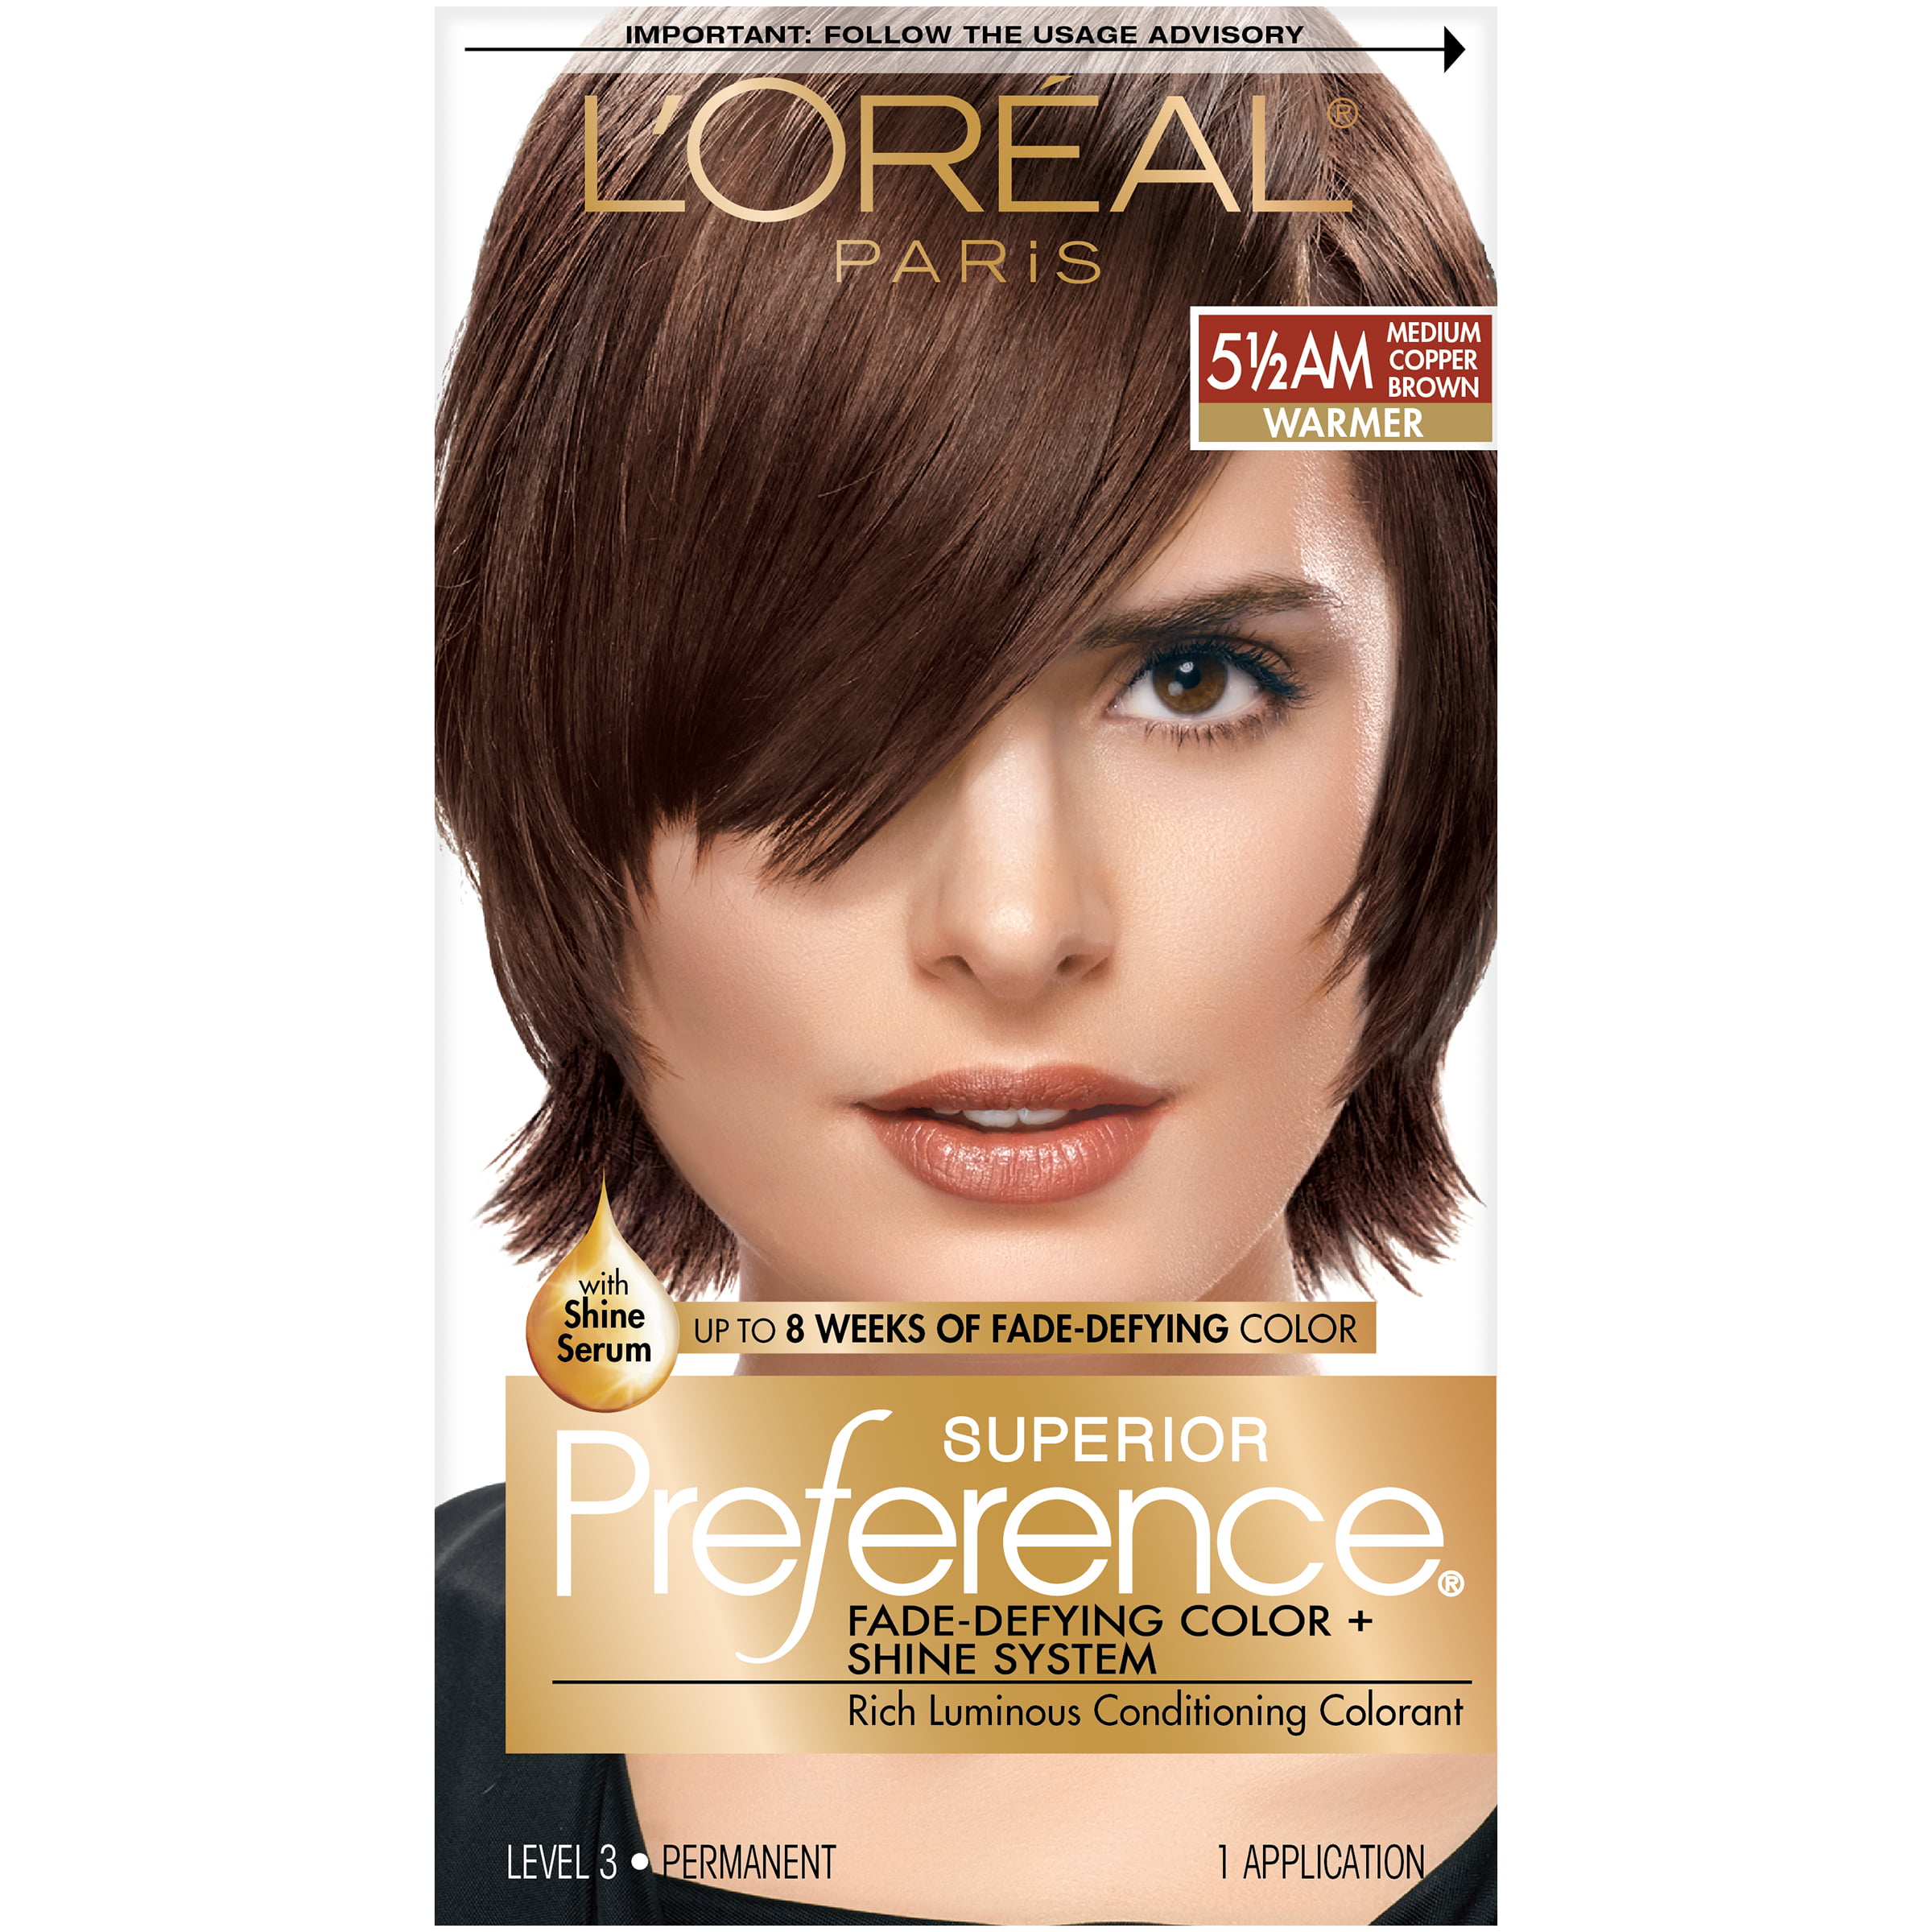 Buy LOreal Paris Superior Preference Fade-Defying Shine Permanent Hair Color,   Medium Copper Brown, 1 Kit Online at Lowest Price in Ubuy Denmark.  10453200